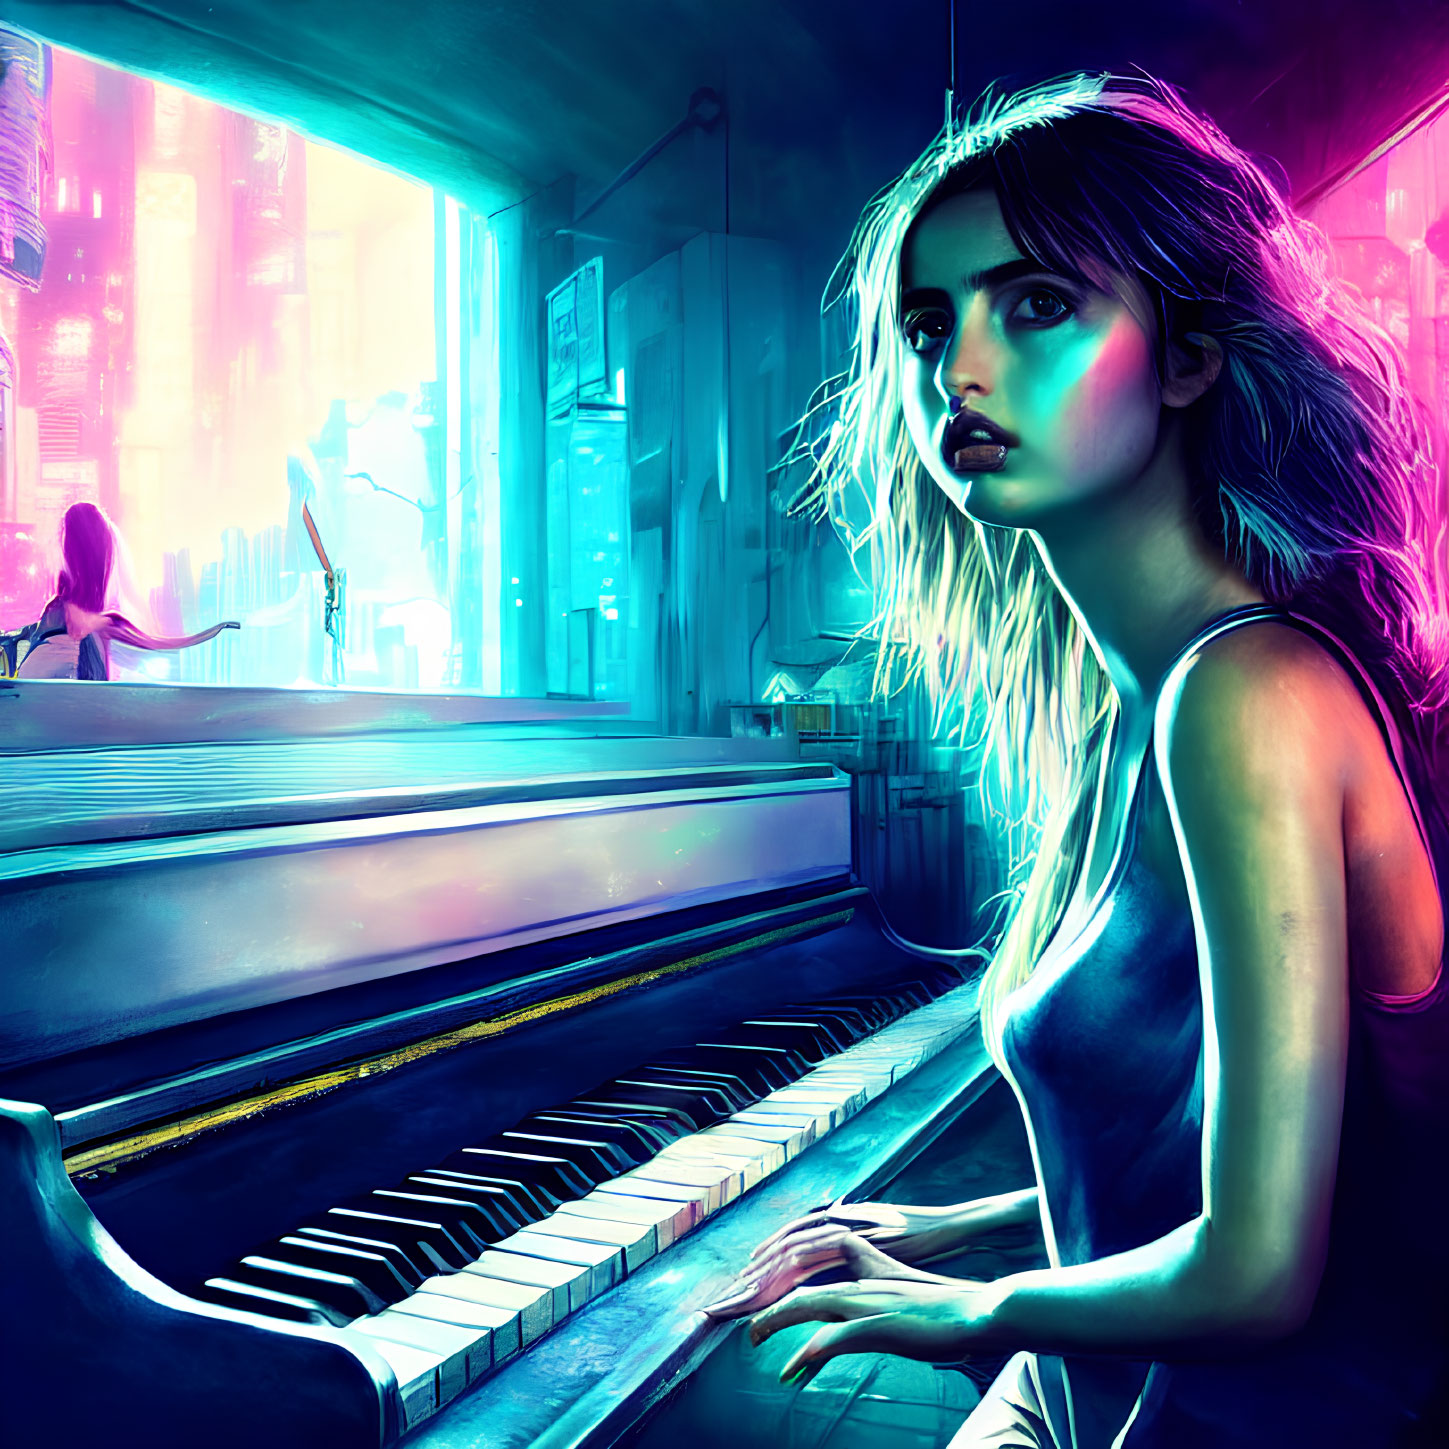 Glowing-haired woman at piano in neon-lit futuristic cityscape